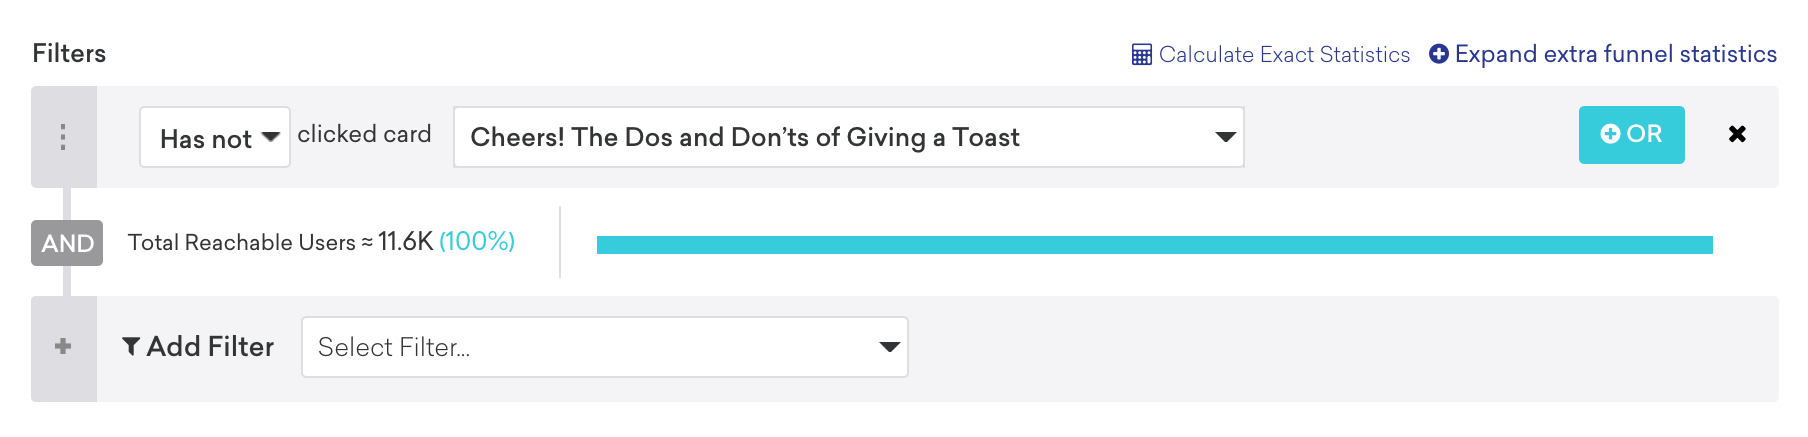 Segment filter example that shows targets users who have not clicked the card "Cheers! The Dos and Don'ts of Giving a Toast".